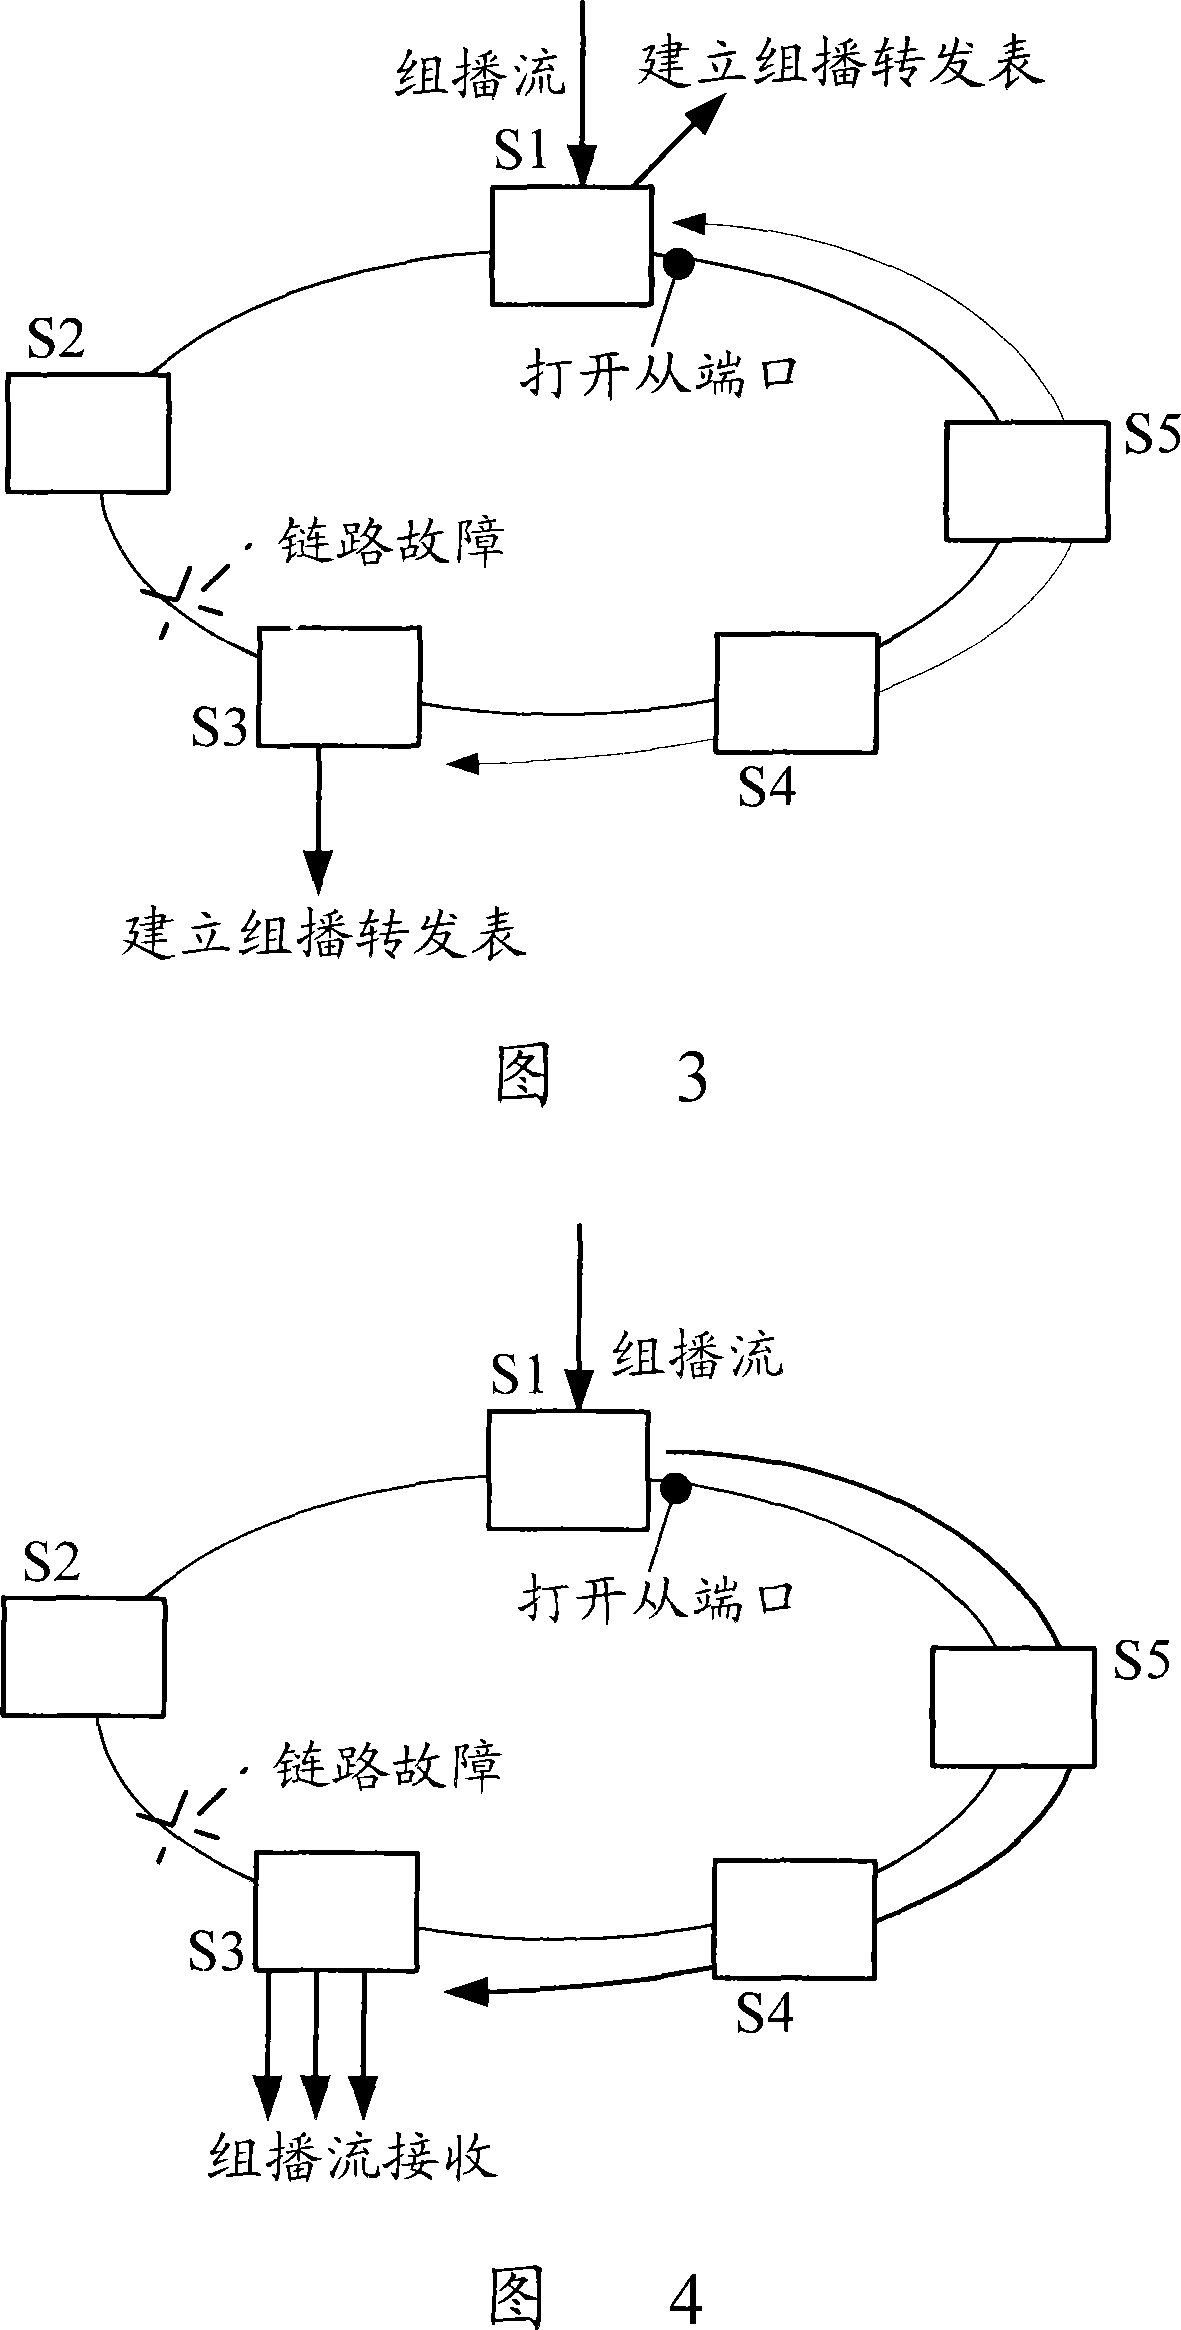 A method for quickly switching Ethernet loop network multicast link